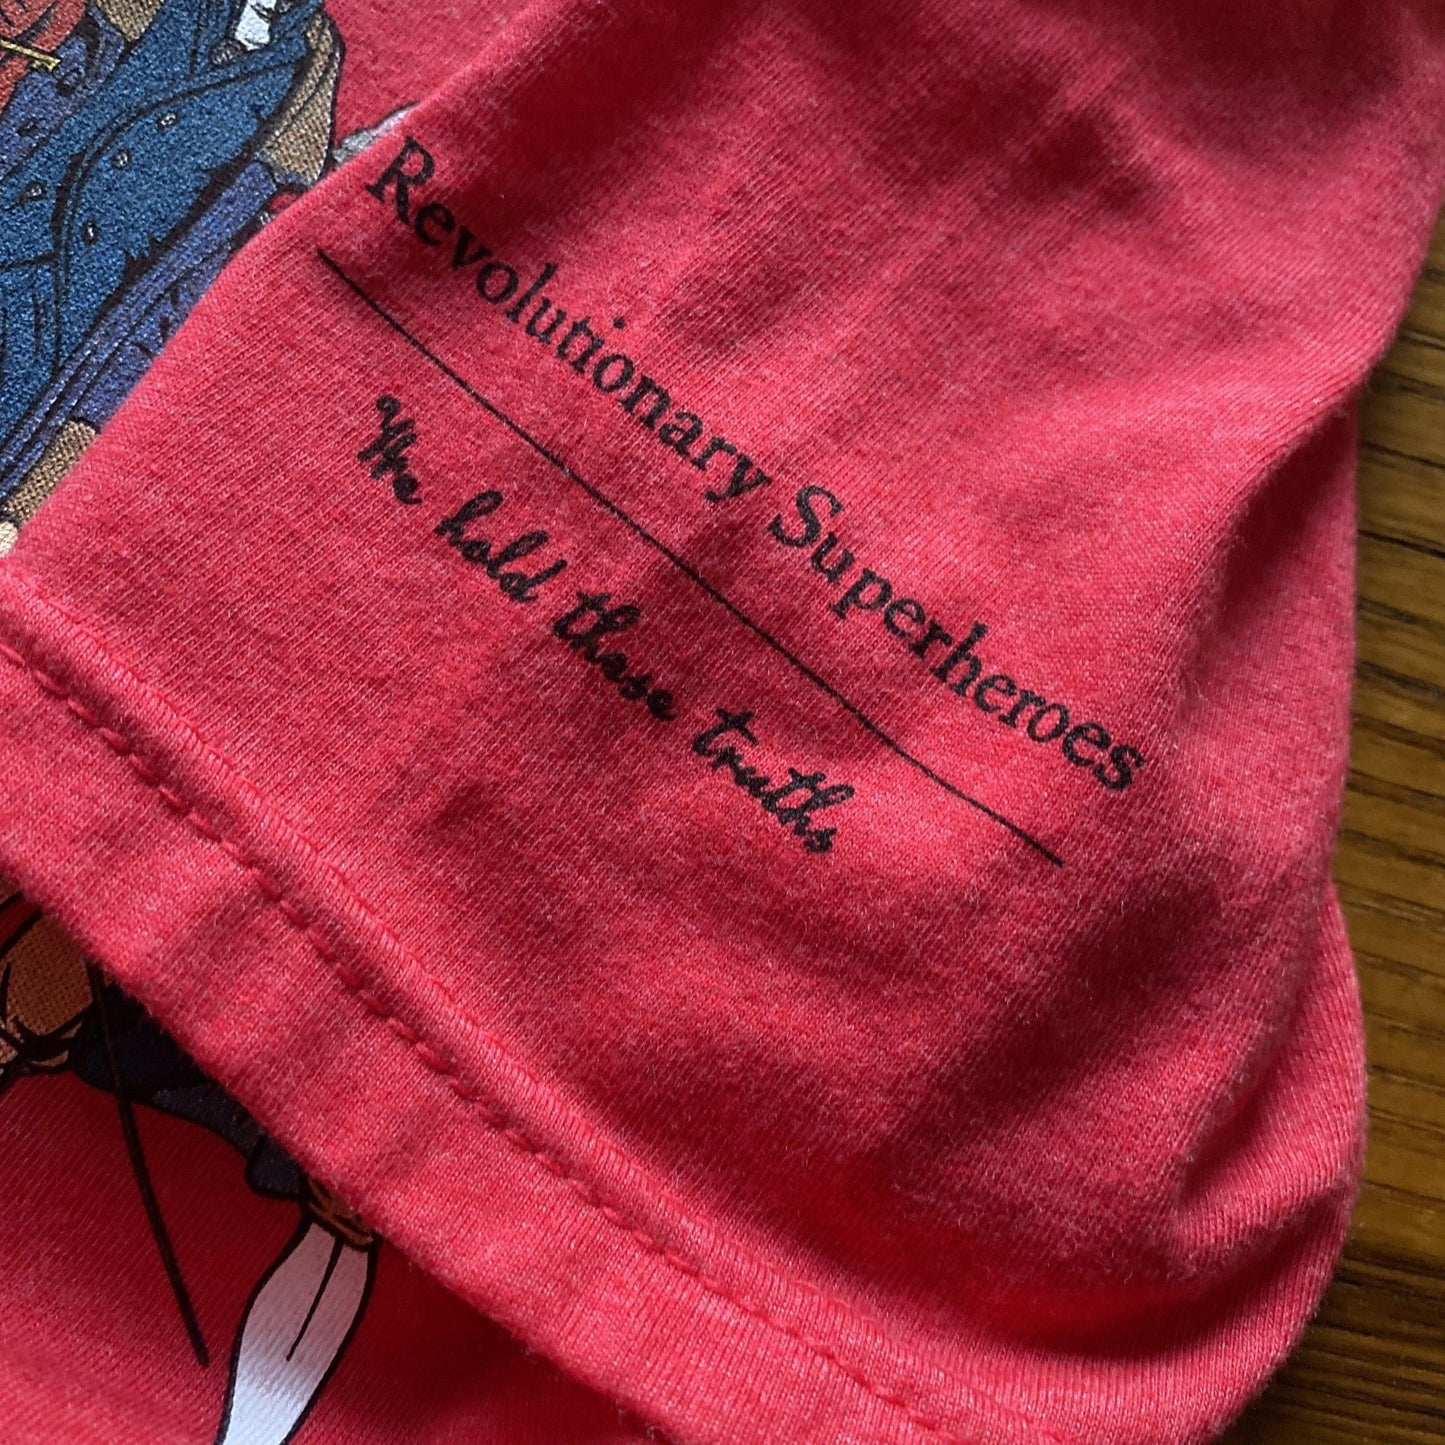 Close-up of sleeves of Ten "Revolutionary Superheroes" Shirt in Youth sizes from The History List store